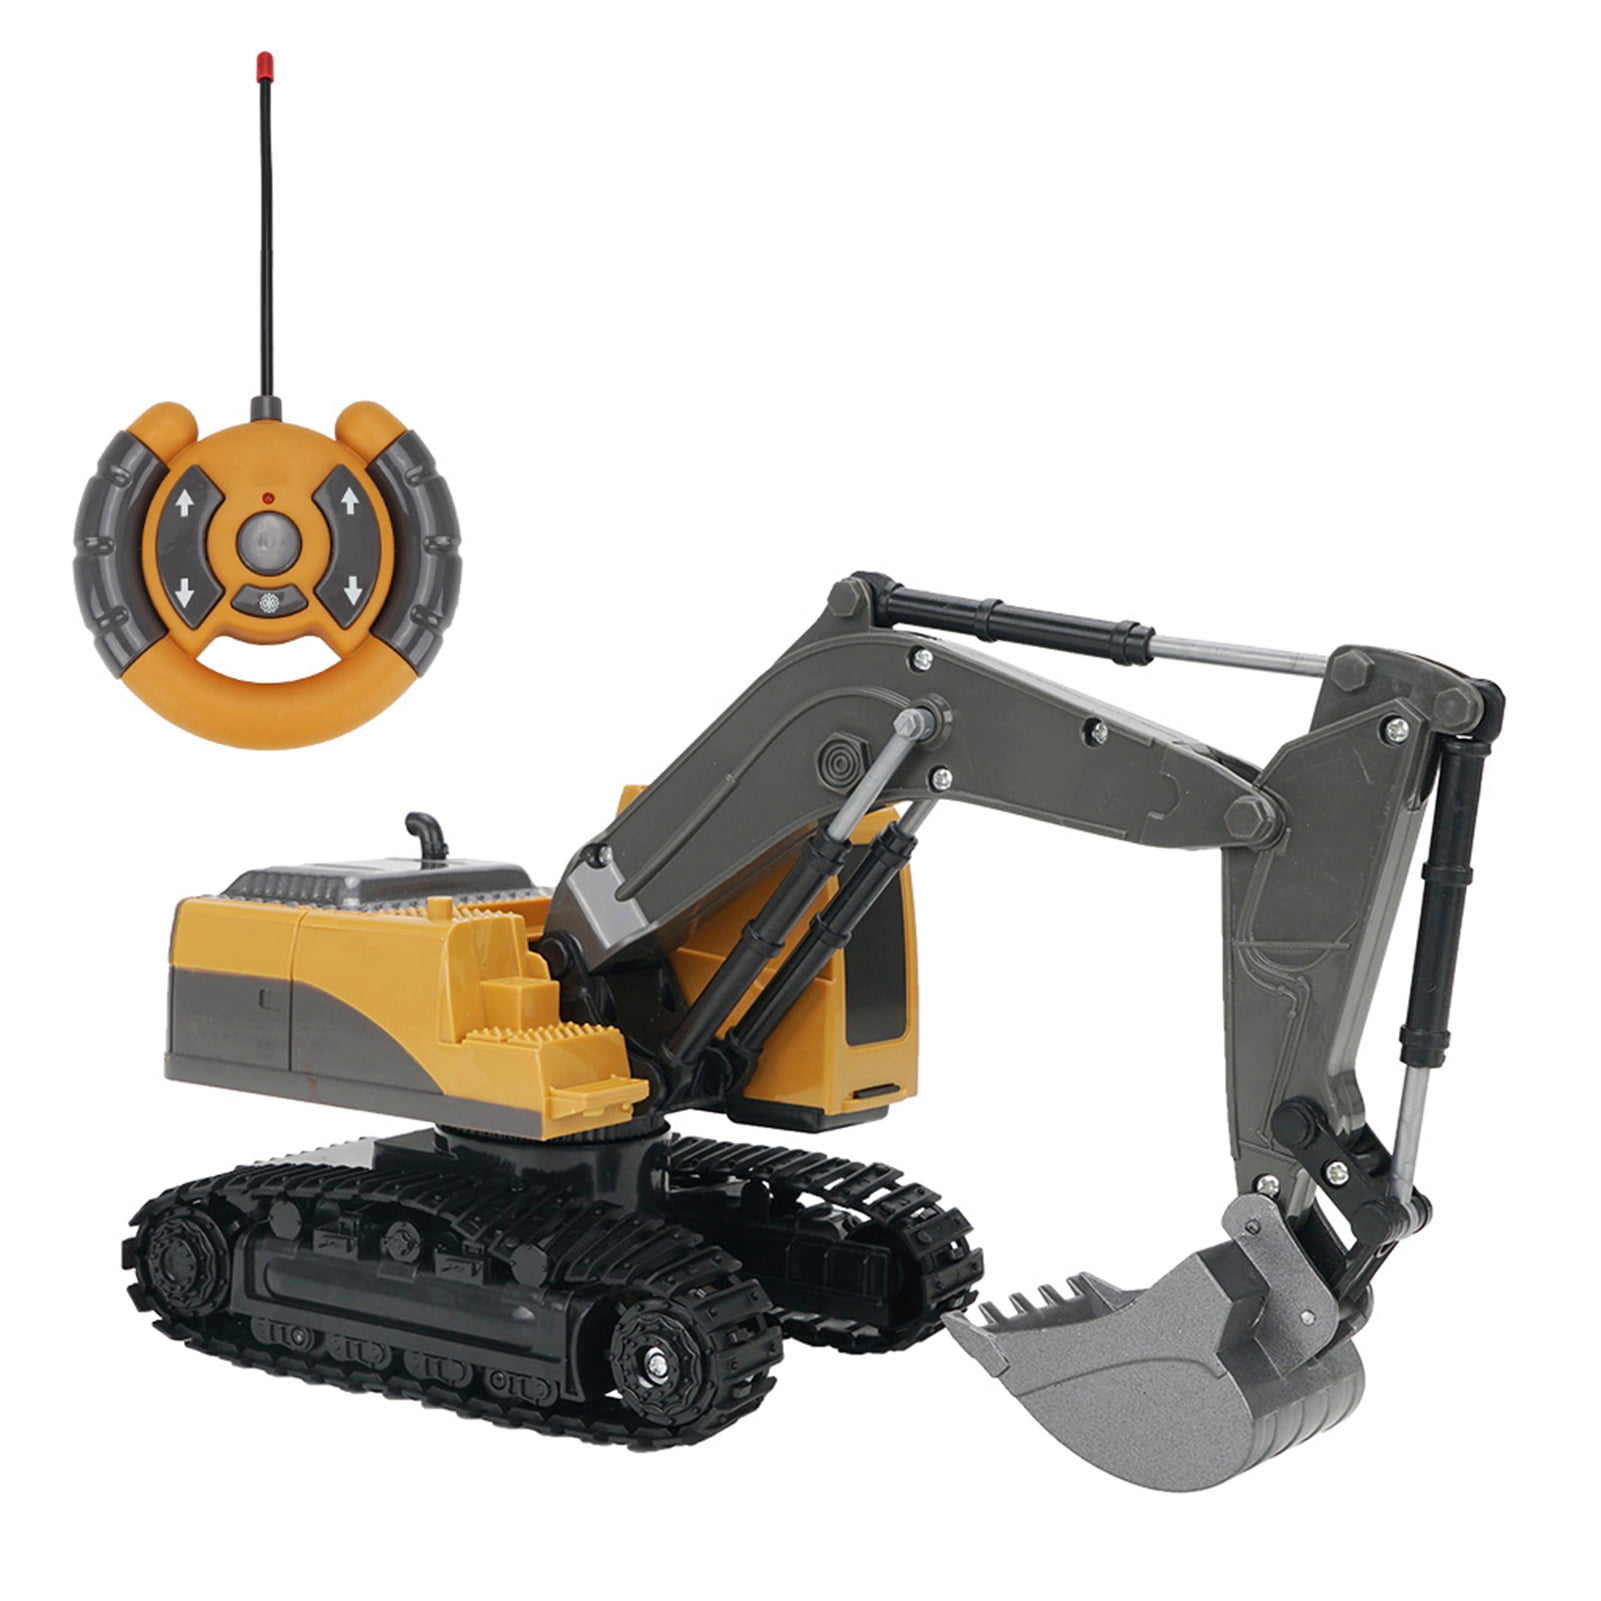 6 Channel Full Functional RC Excavator 1/24 Scale Remote Control Excavator Toy Rechargeable Construction Vehicles with Metal Shovel and Lights Sounds